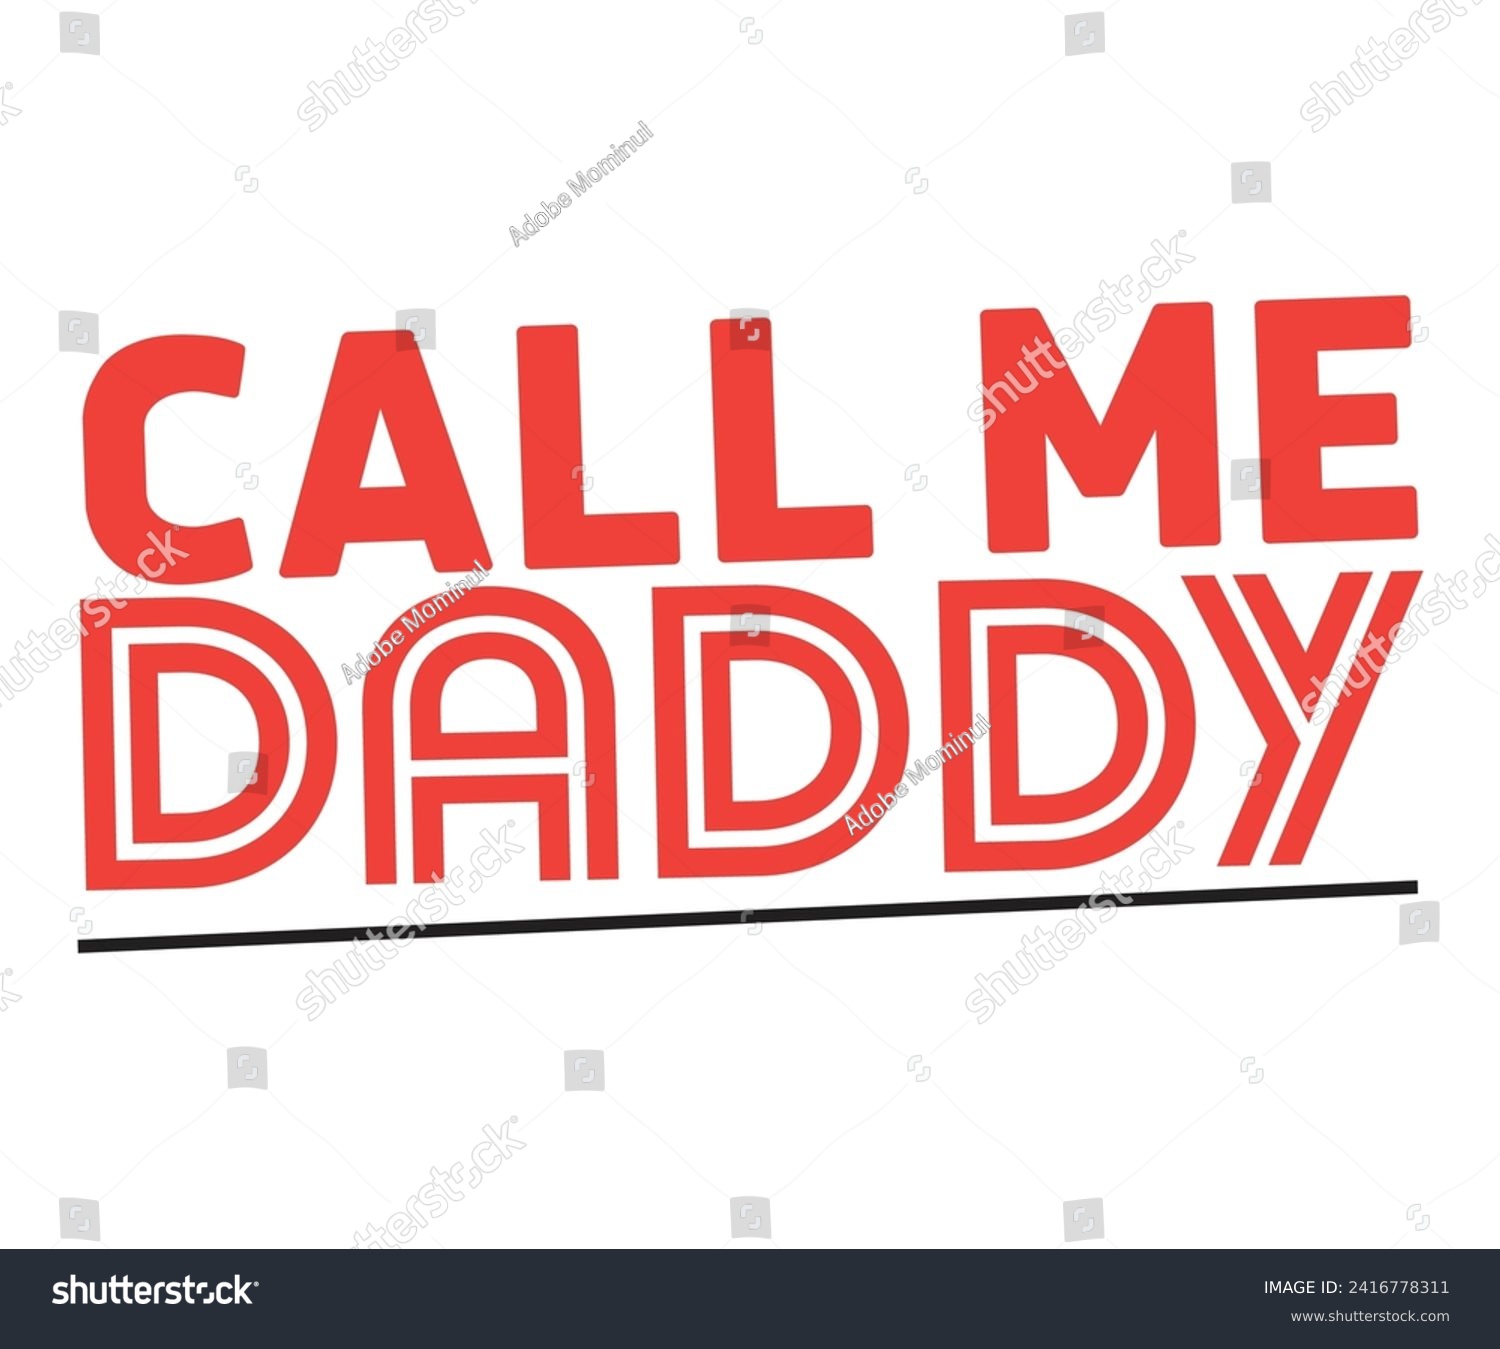 SVG of Call Me Daddy Svg,Father's Day Svg,Papa svg,Grandpa Svg,Father's Day Saying Qoutes,Dad Svg,Funny Father, Gift For Dad Svg,Daddy Svg,Family Svg,T shirt Design,Svg Cut File,Typography svg